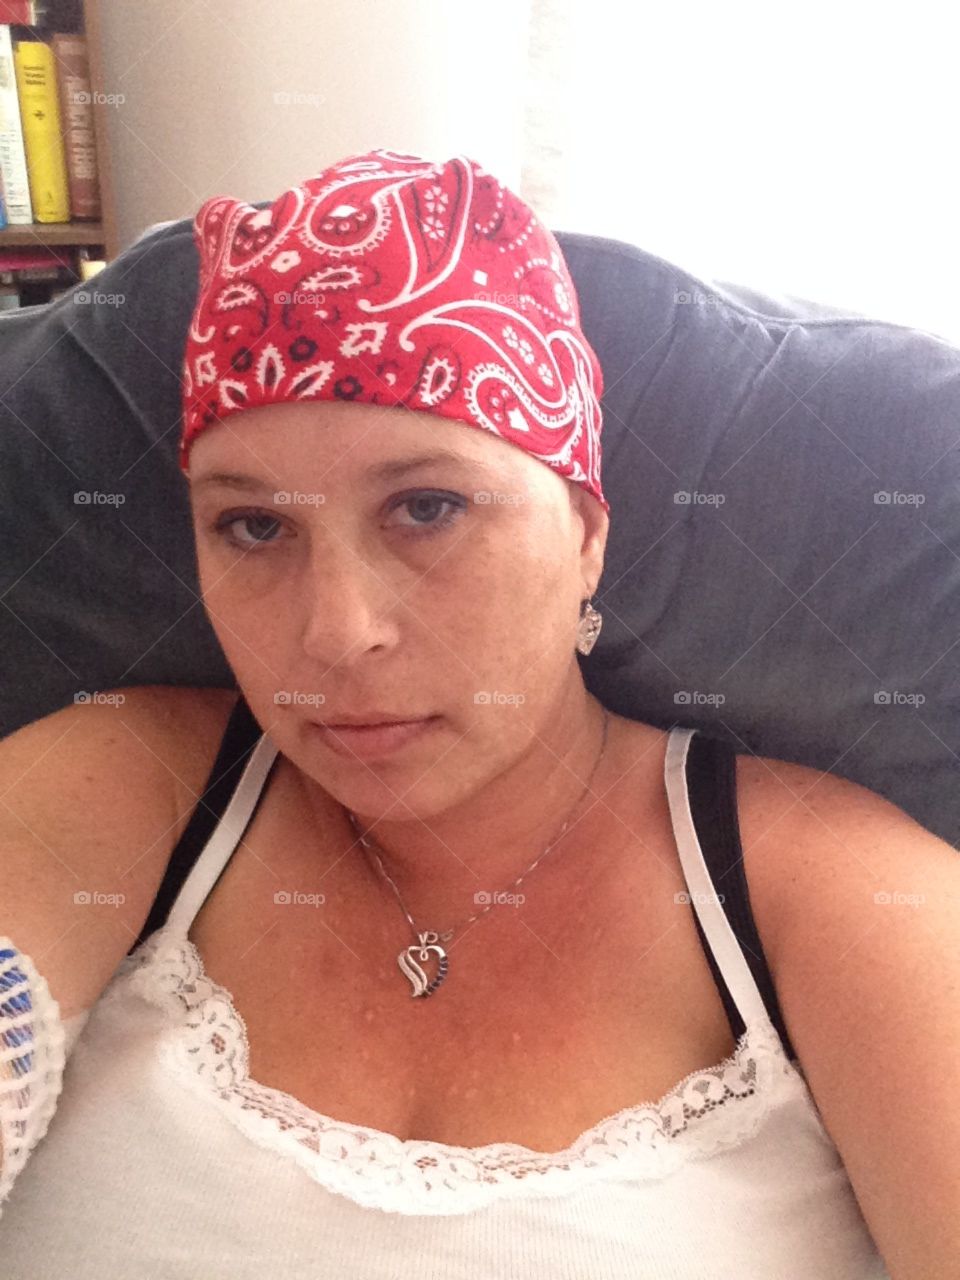 Trying out the bandana look after loosing my hair to chemotherapy